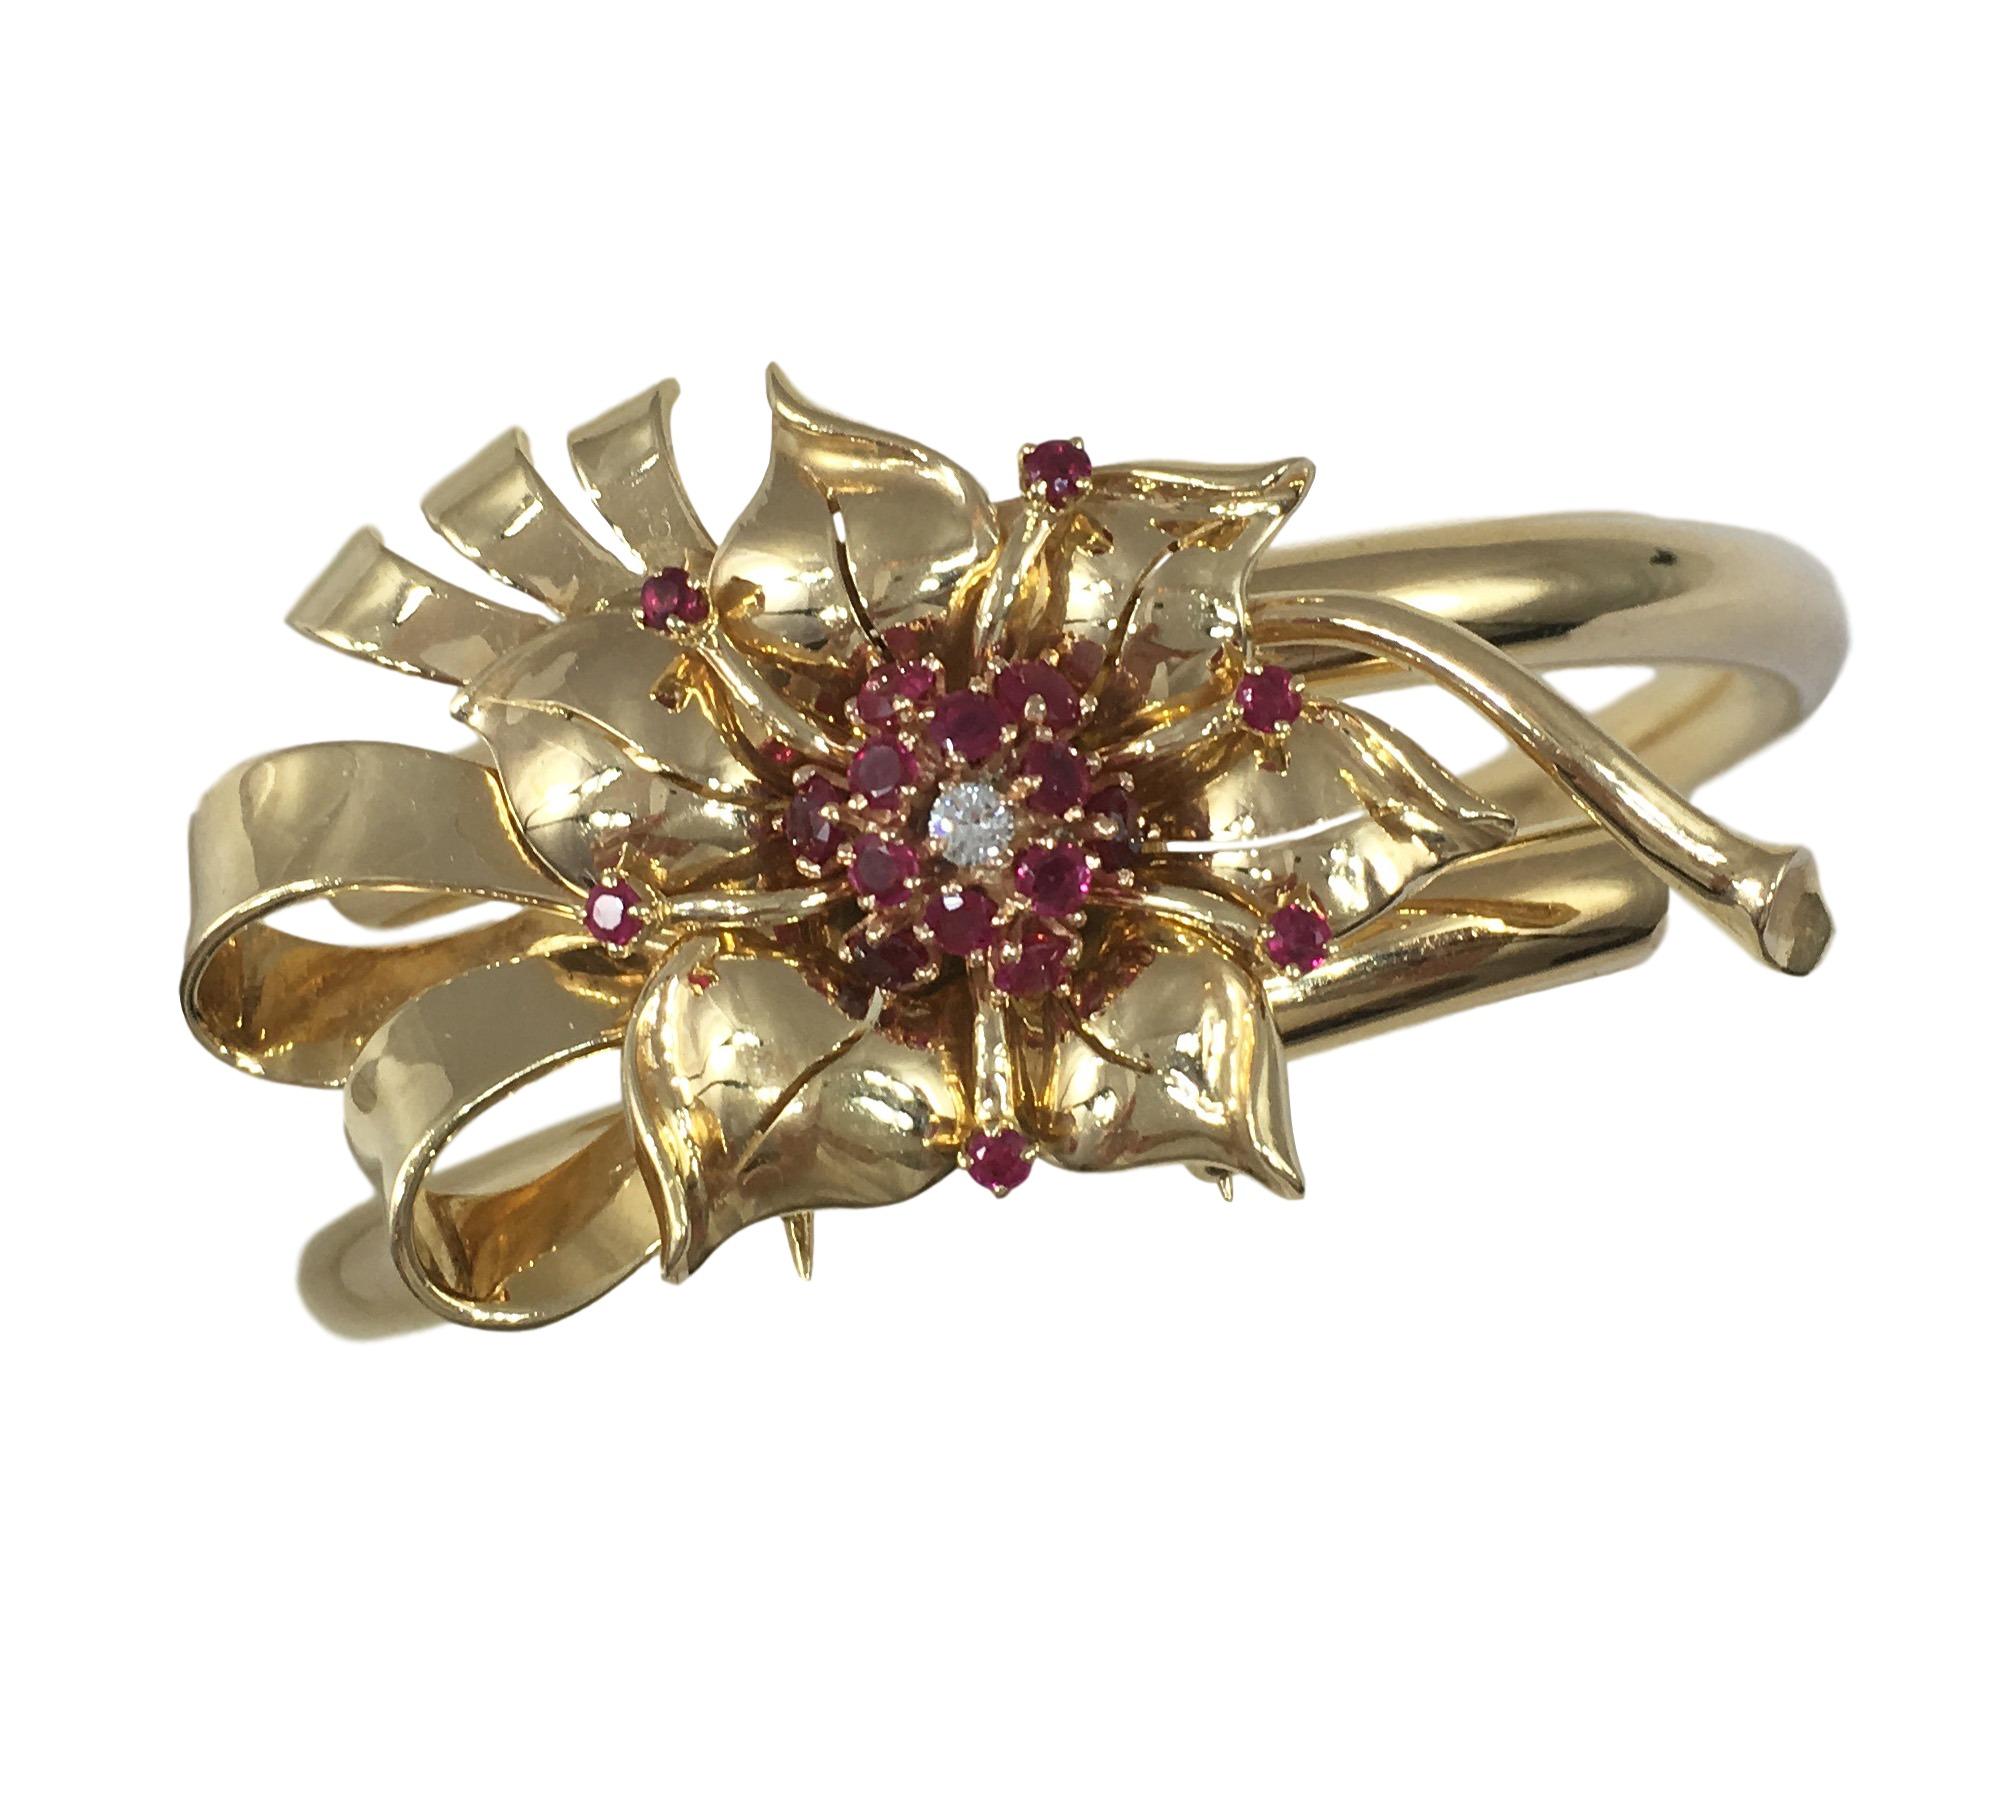 A fabulous bangle attributed to Paul Flato, created in the 1940’s.

This chic piece allows the flower head motif to be detached and worn independently as a brooch. The craftsmanship and design of this piece with its ingenious interlinking parts